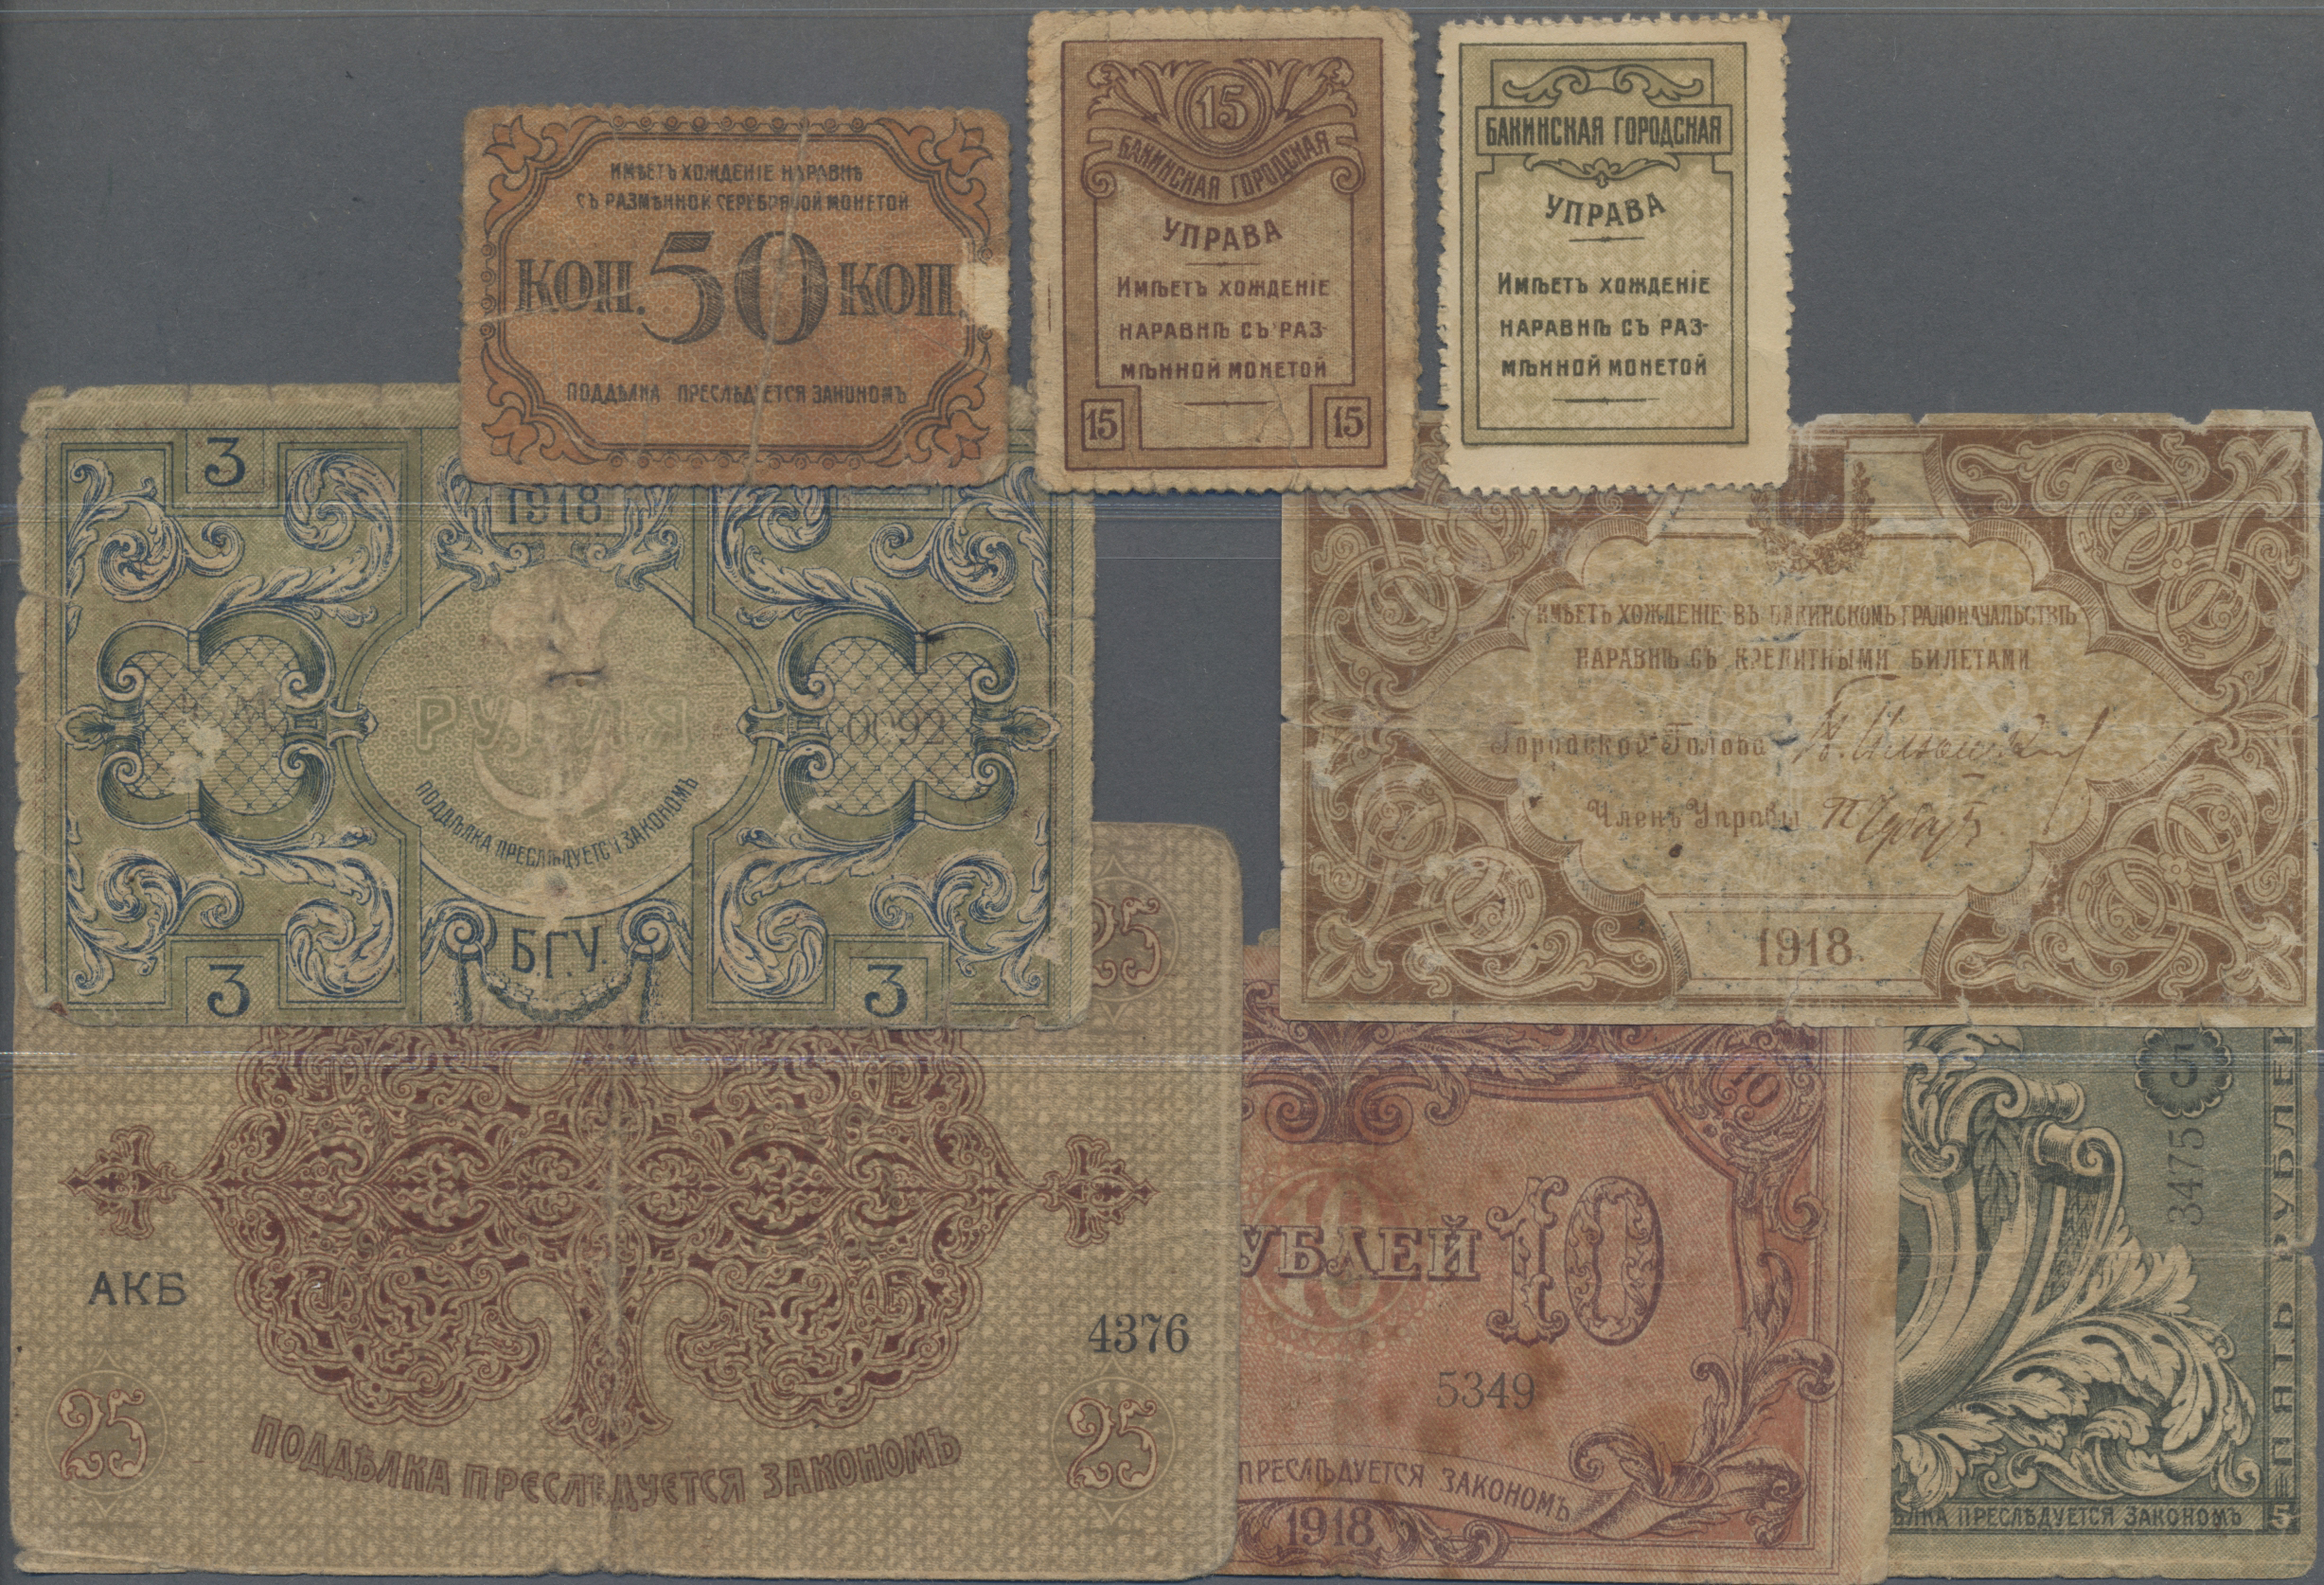 Lot 00410 - Russia / Russland | Banknoten  -  Auktionshaus Christoph Gärtner GmbH & Co. KG 55th AUCTION - Day 1